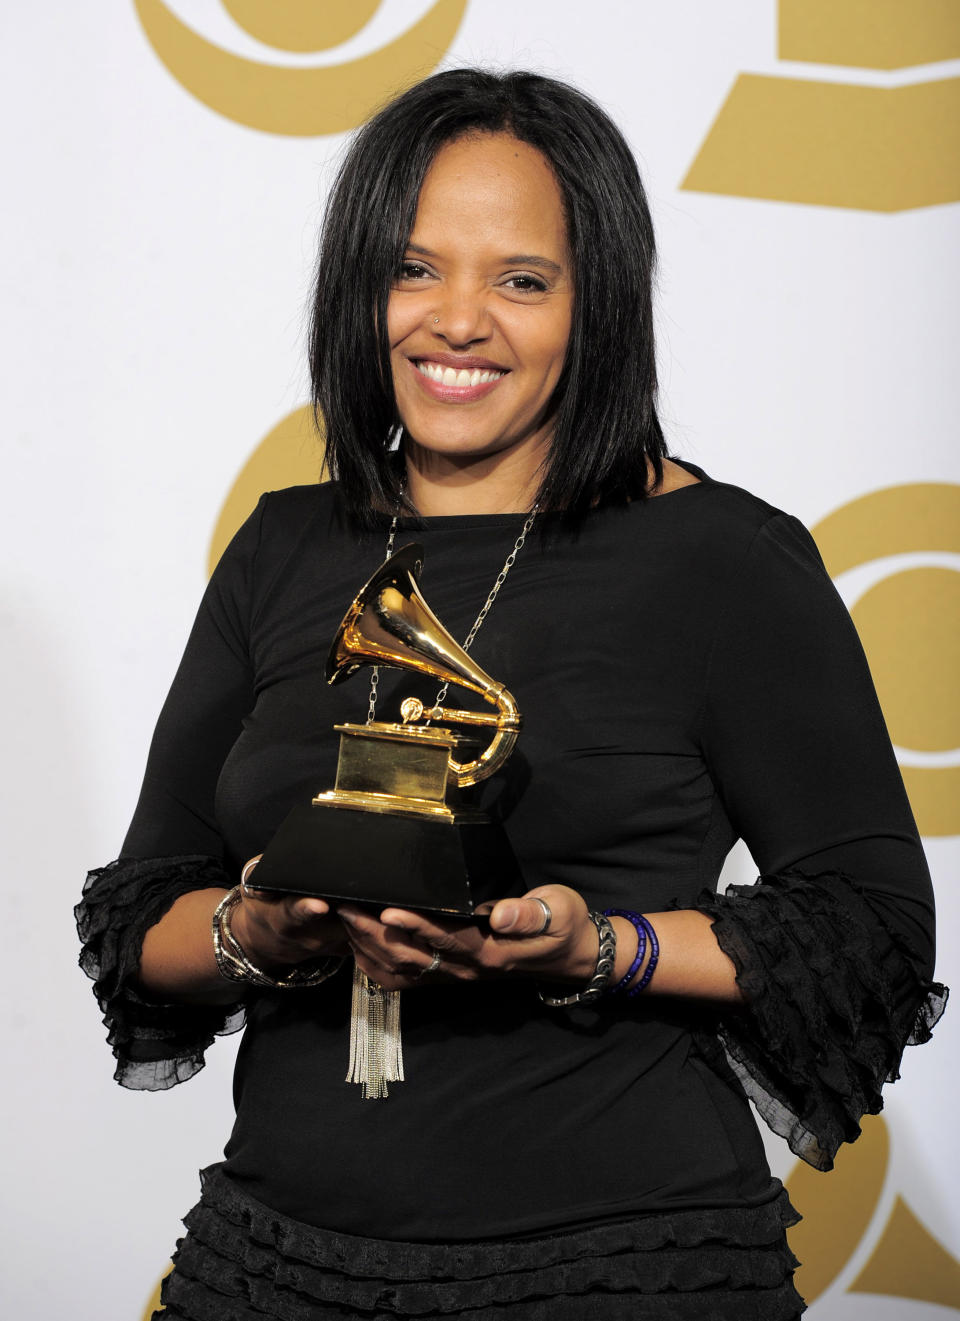 FILE - Terri Lyne Carrington poses backstage with the award for best jazz vocal album for "The Mosaic Project" at the 54th annual Grammy Awards in Los Angeles on Feb. 12, 2012. The three-time Grammy winner is nominated for best instrumental jazz album – an award she won in 2014 and is the only woman to do so in the show’s 63-year history. (AP Photo/Mark J. Terrill, File)